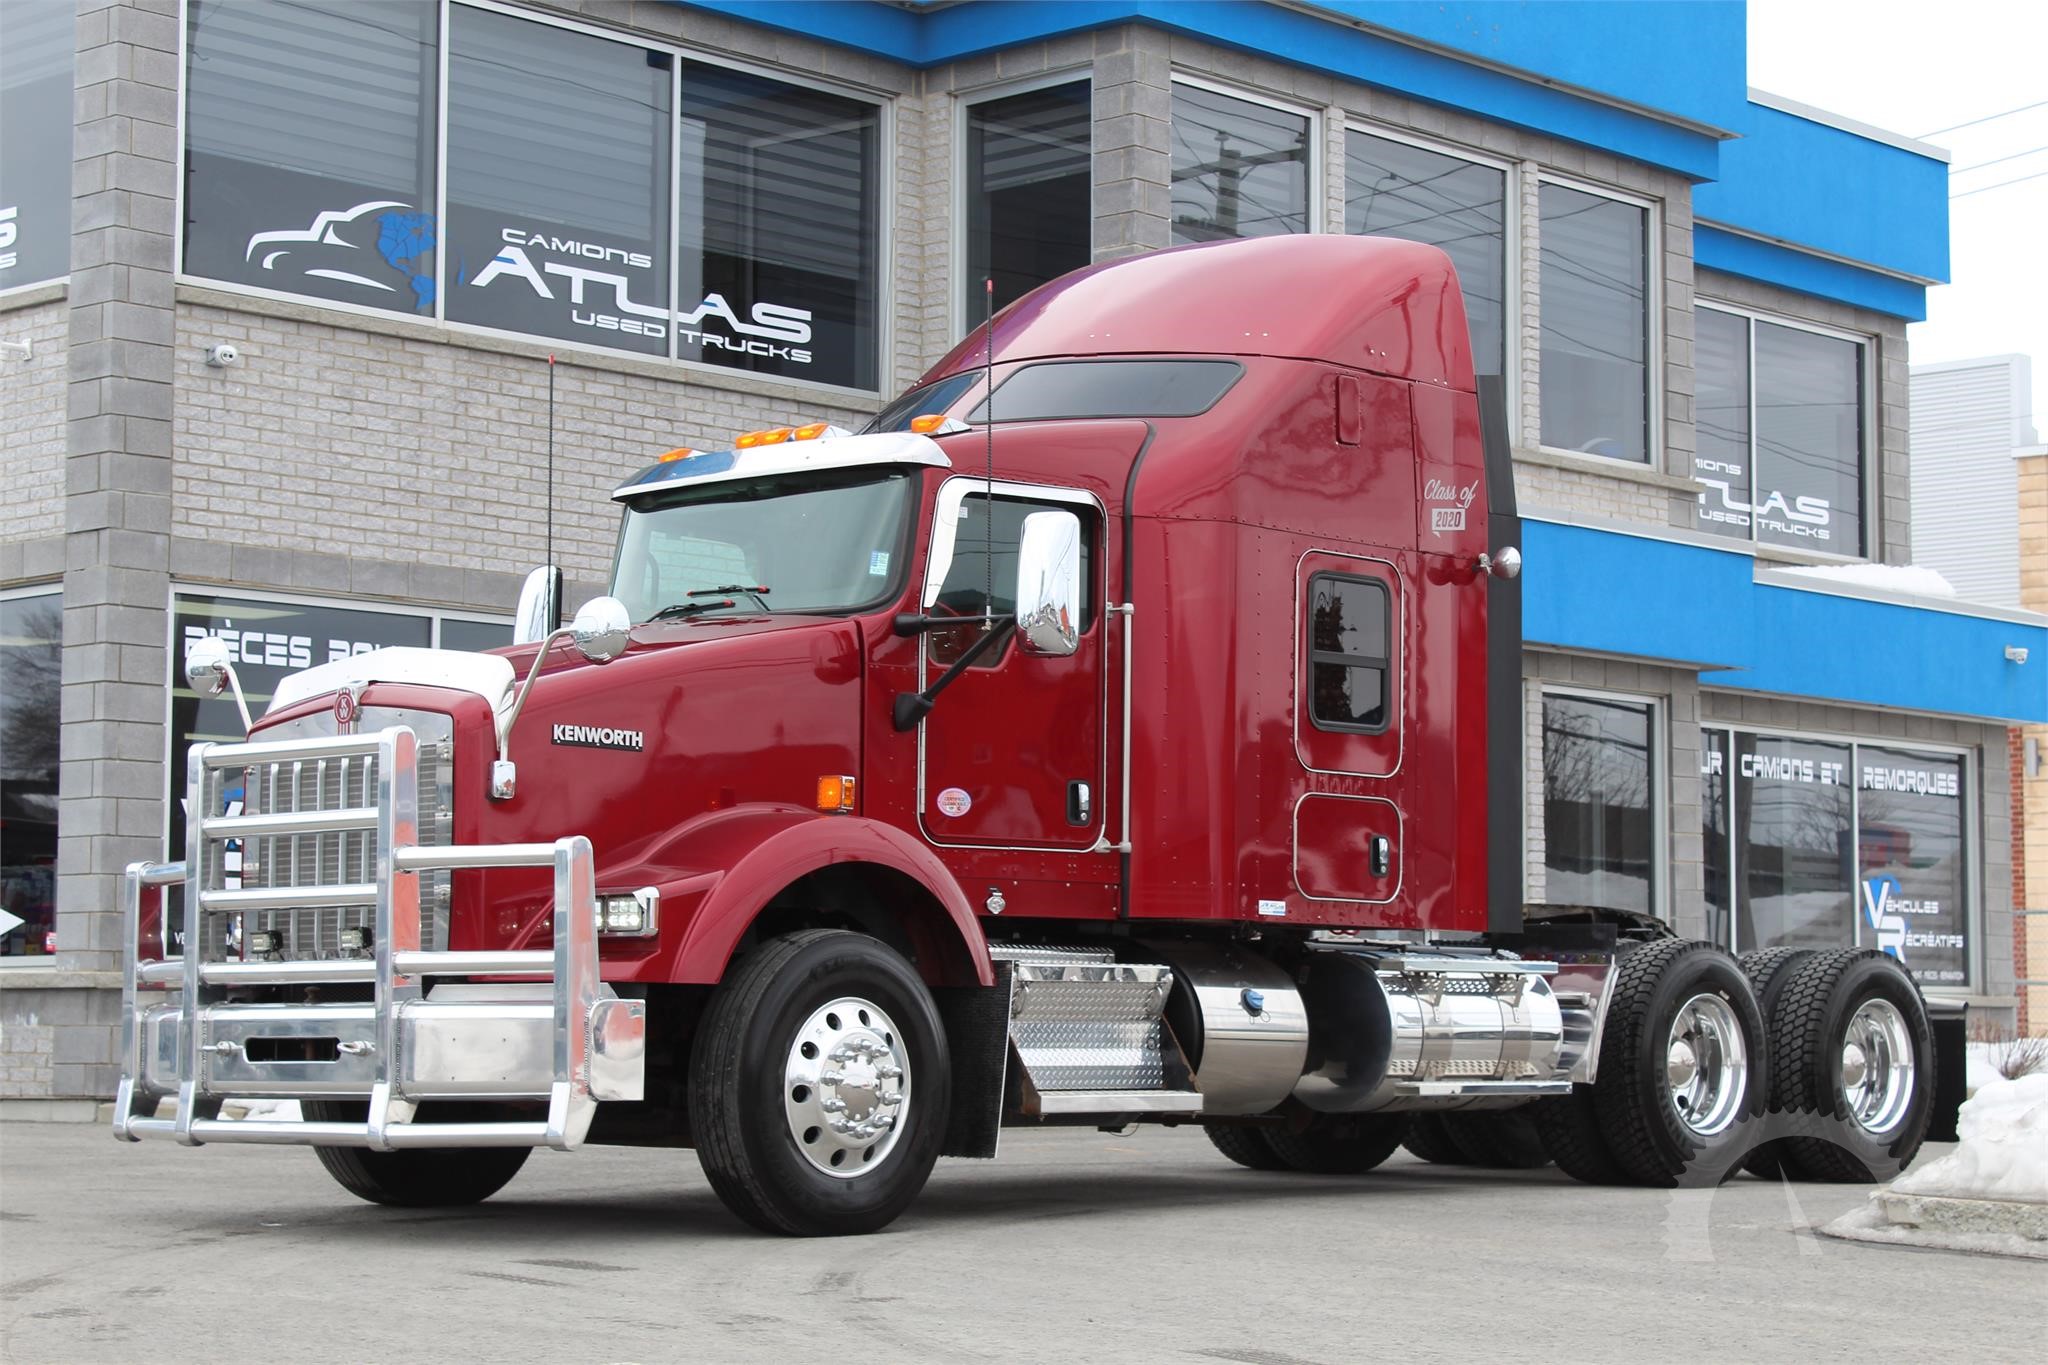 KENWORTH T800 Sleeper Trucks Auction Results - 173 Listings |   - Page 1 of 7